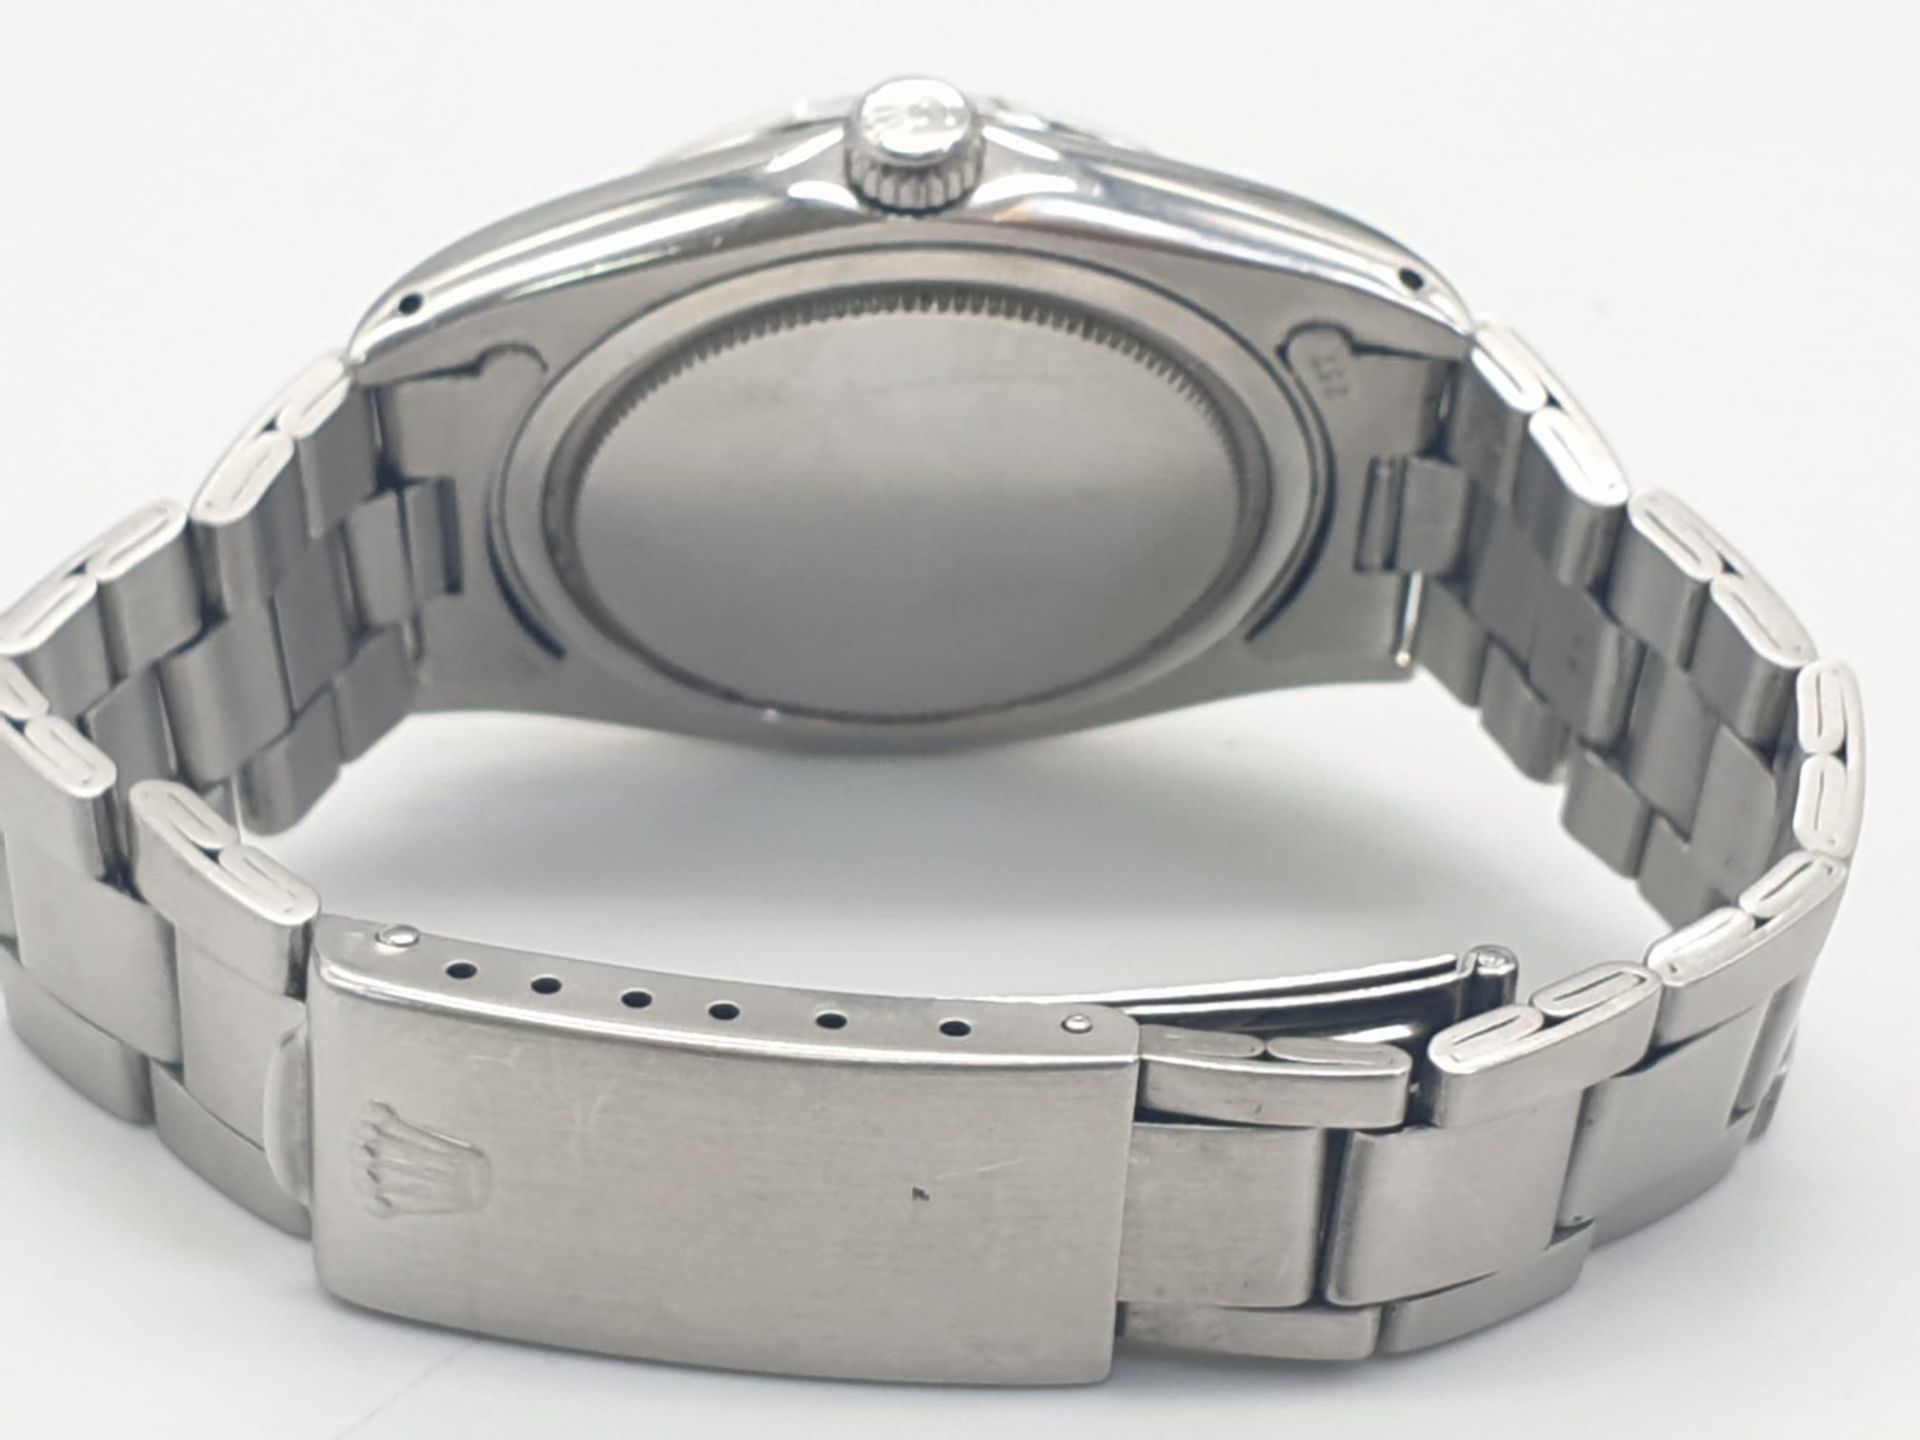 A ROLEX OYSTERDATE "40" MIDSIZE UNISEX WATCH IN STAINLESS STEEL WITH UNUSUAL GREY DIAL. 34mm - Image 3 of 8